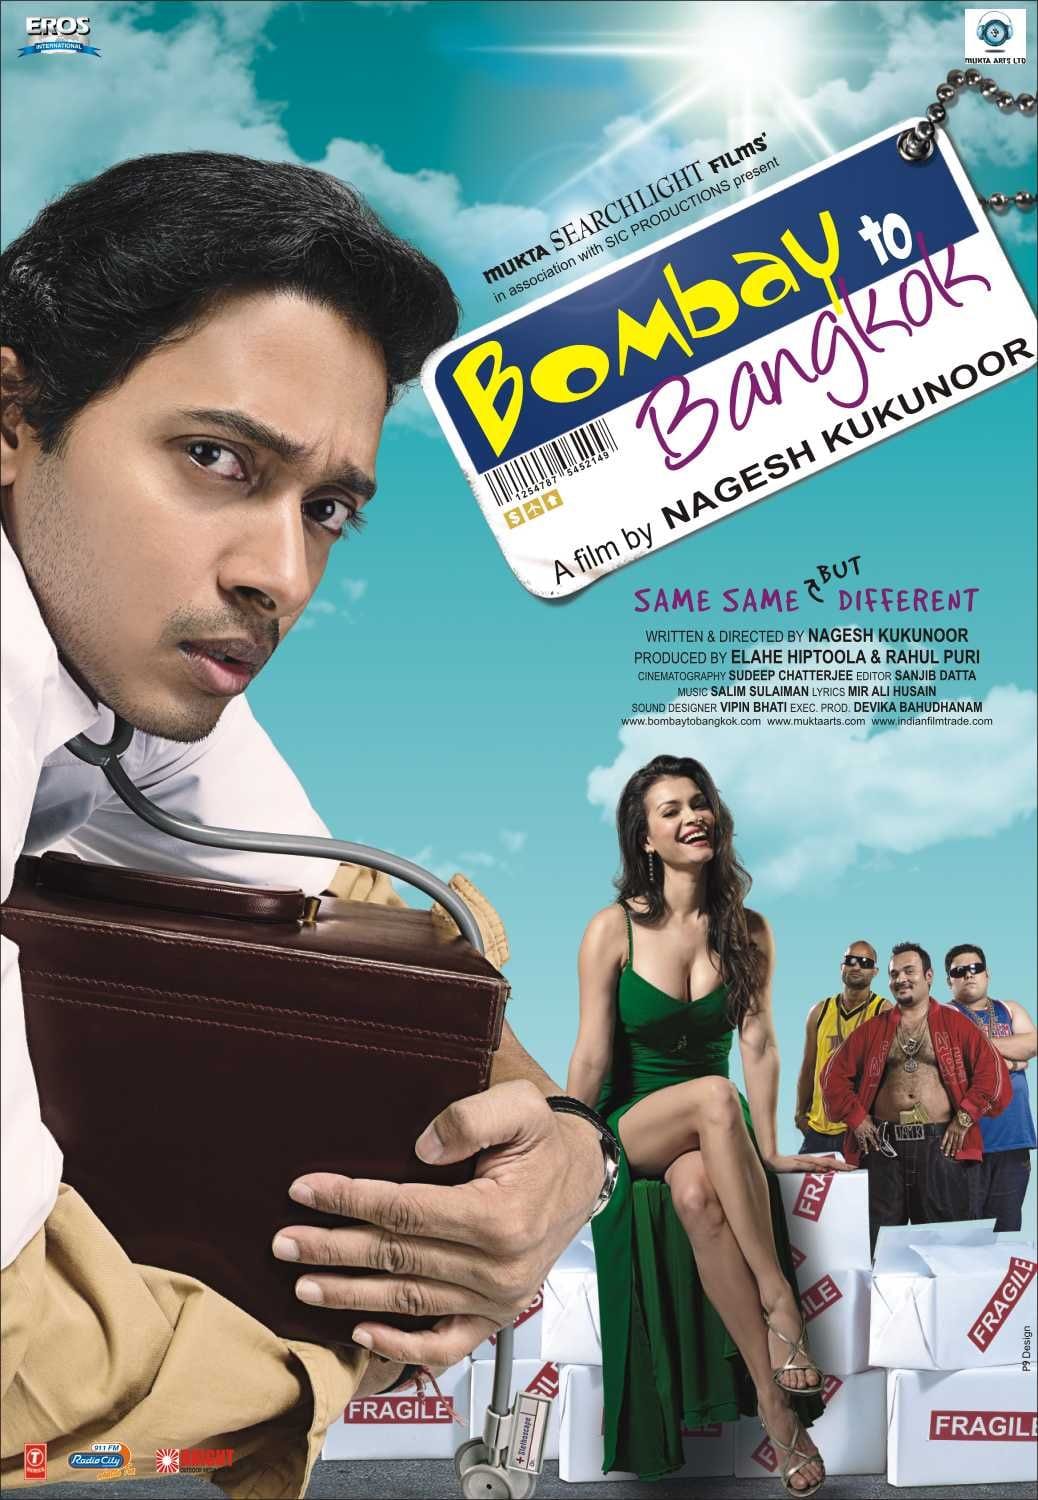 Poster for the movie "Bombay to Bangkok"